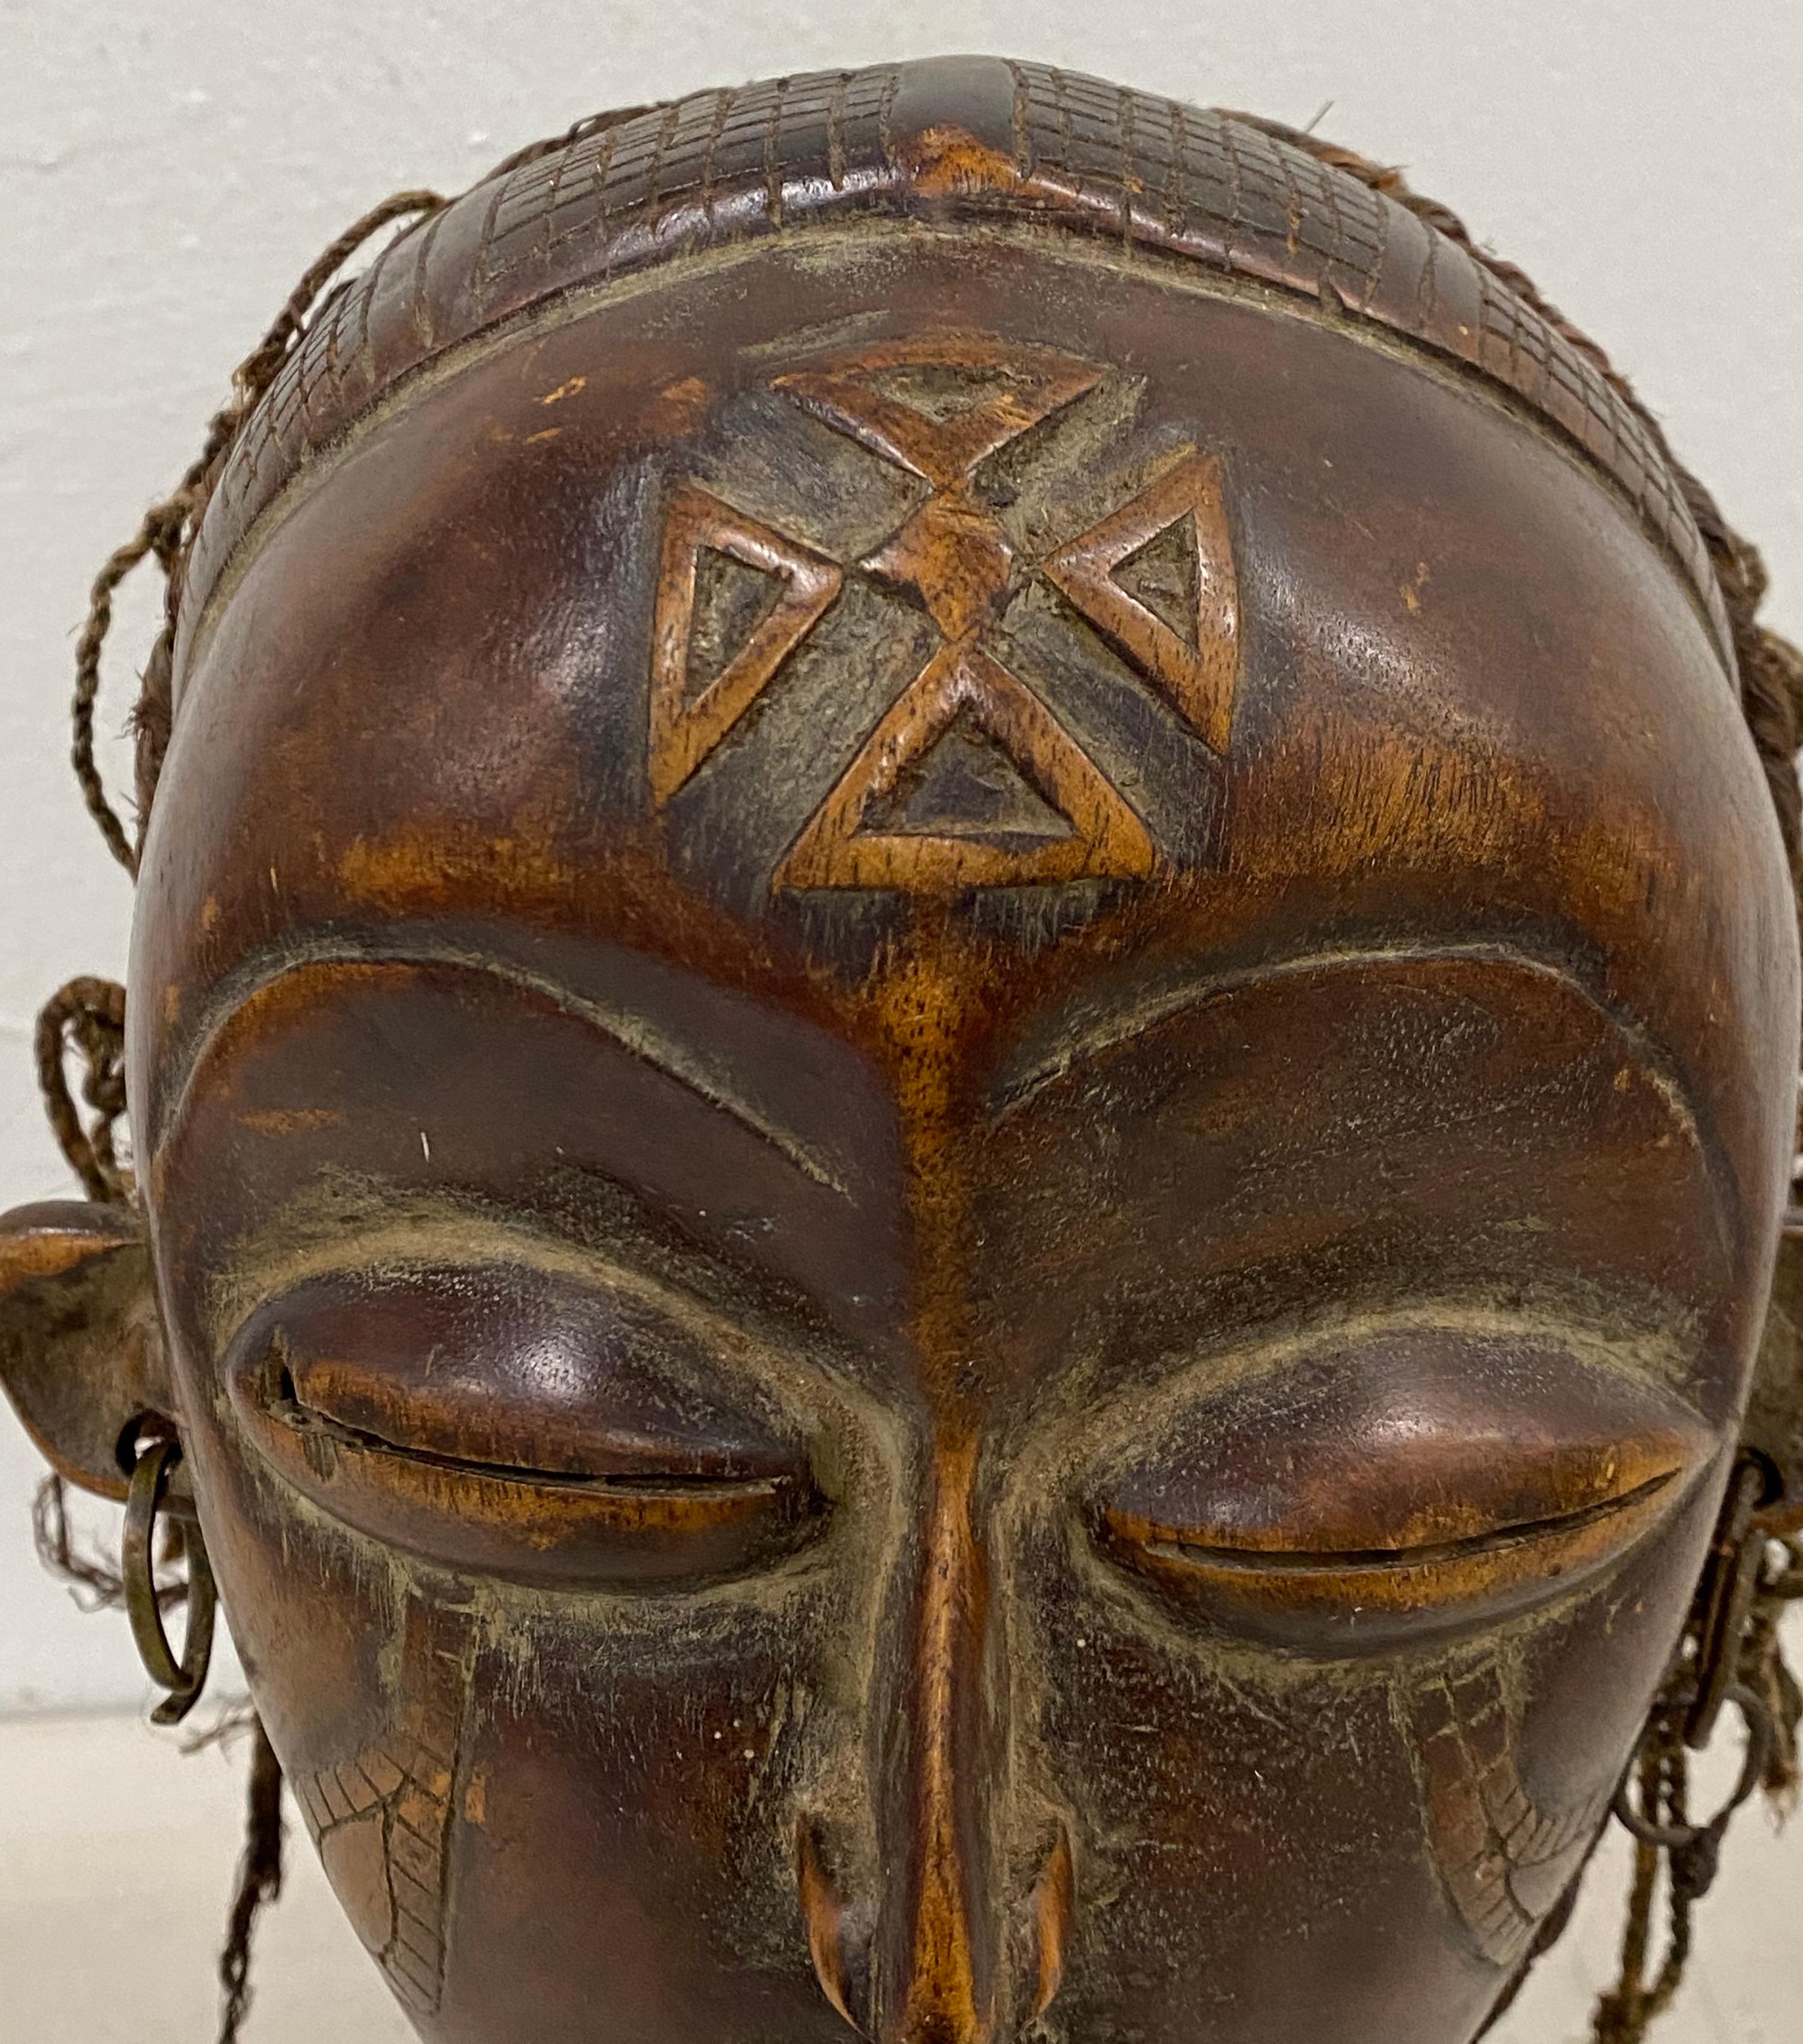 Mid 20th century hand carved African tribal mask.

Fine old school wooden African Tribal mask

Hand carved portrait with natural fiber hair

Measures: 8